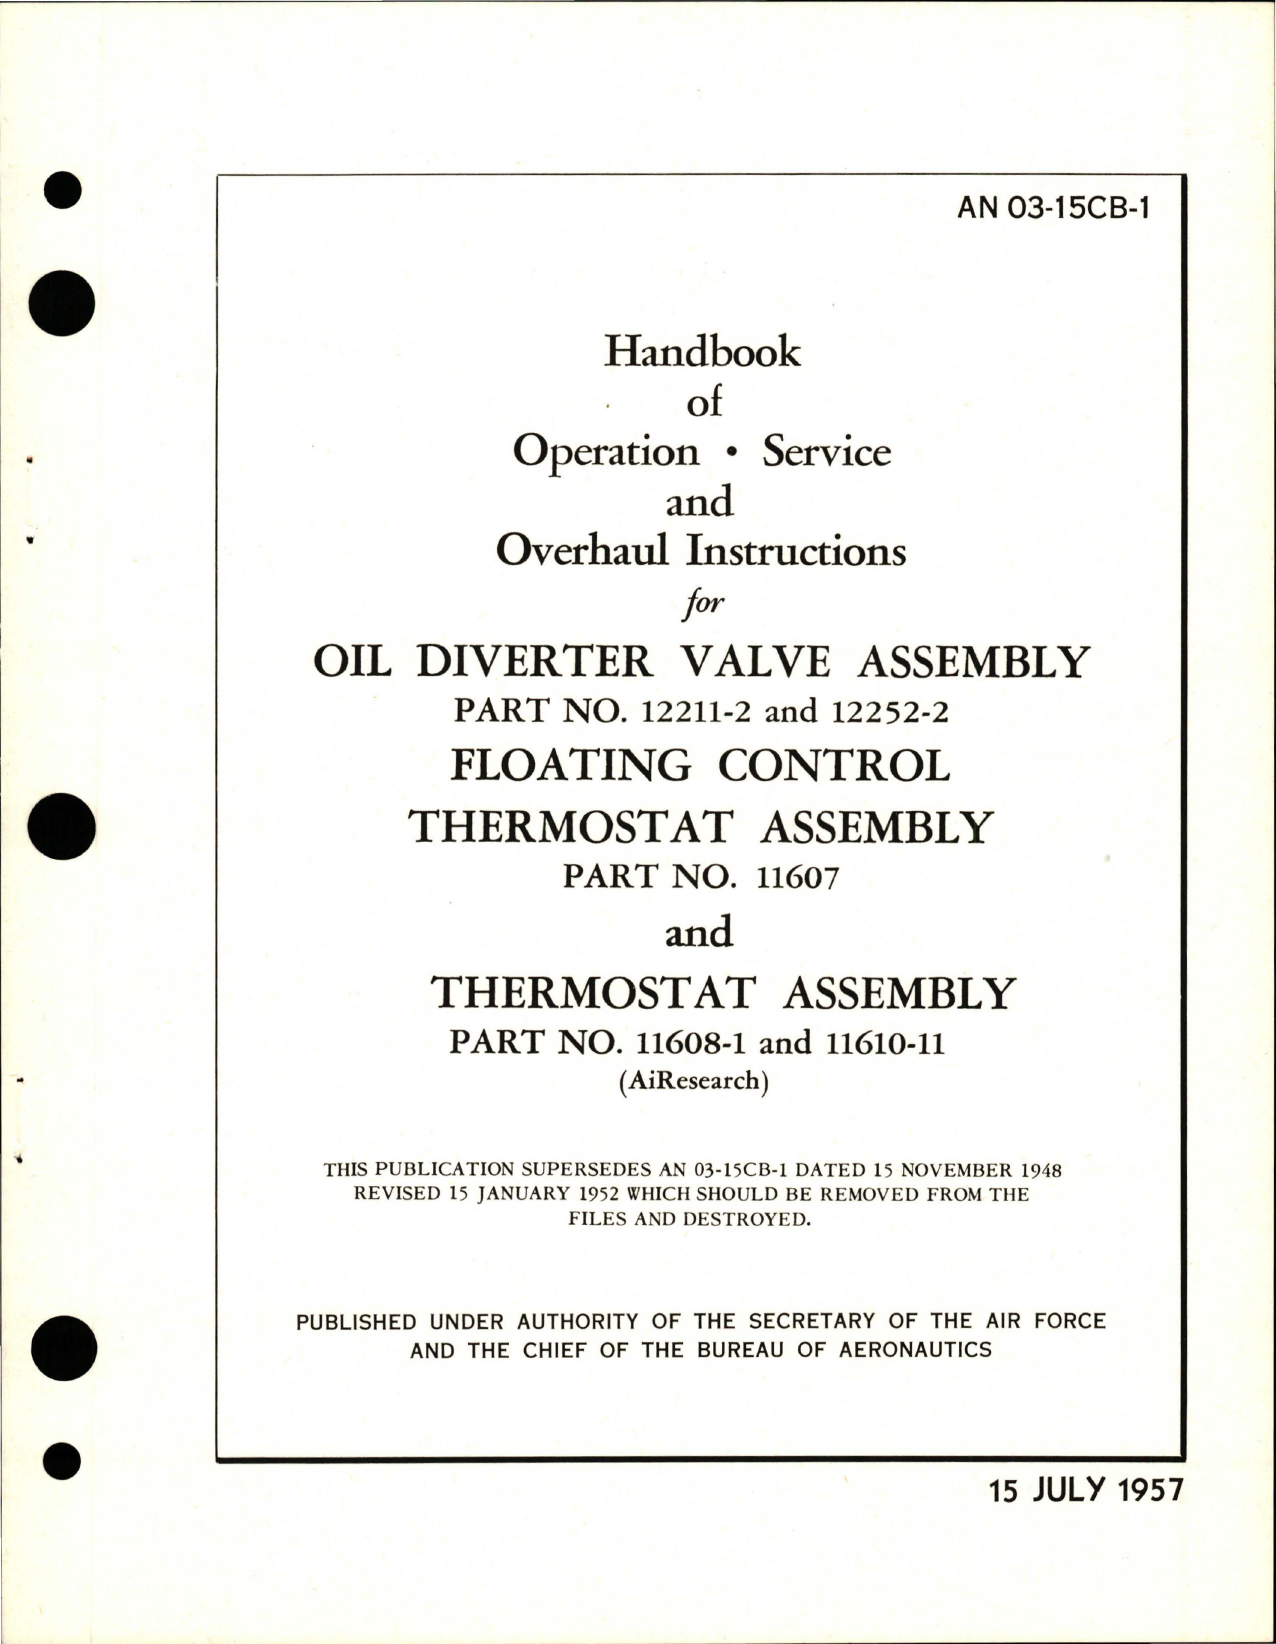 Sample page 1 from AirCorps Library document: Operation, Service and Overhaul Instructions for Oil Diverter Valve Assembly, Floating Control Thermostat Assembly and Thermostat Assembly